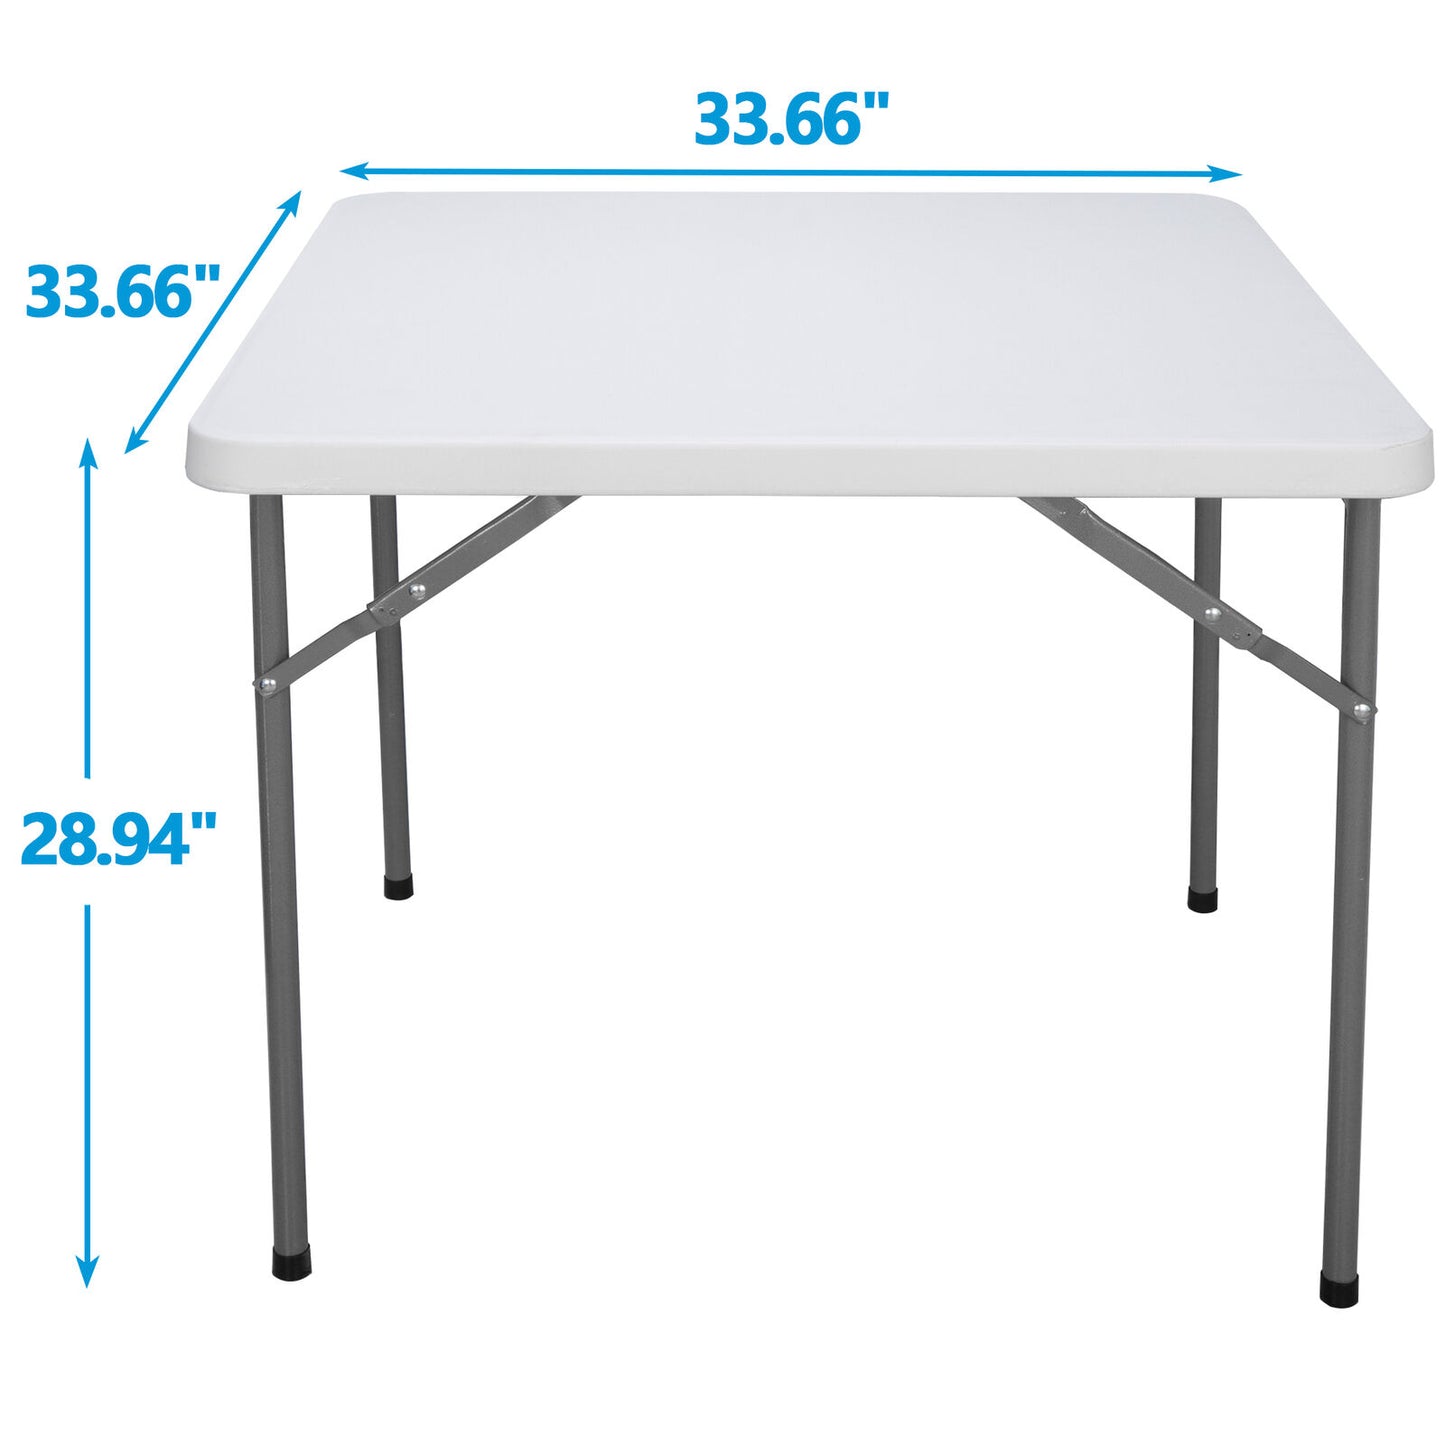 3ft Square Folding Card Table Portable Plastic Camping Picnic Utility Table Whit